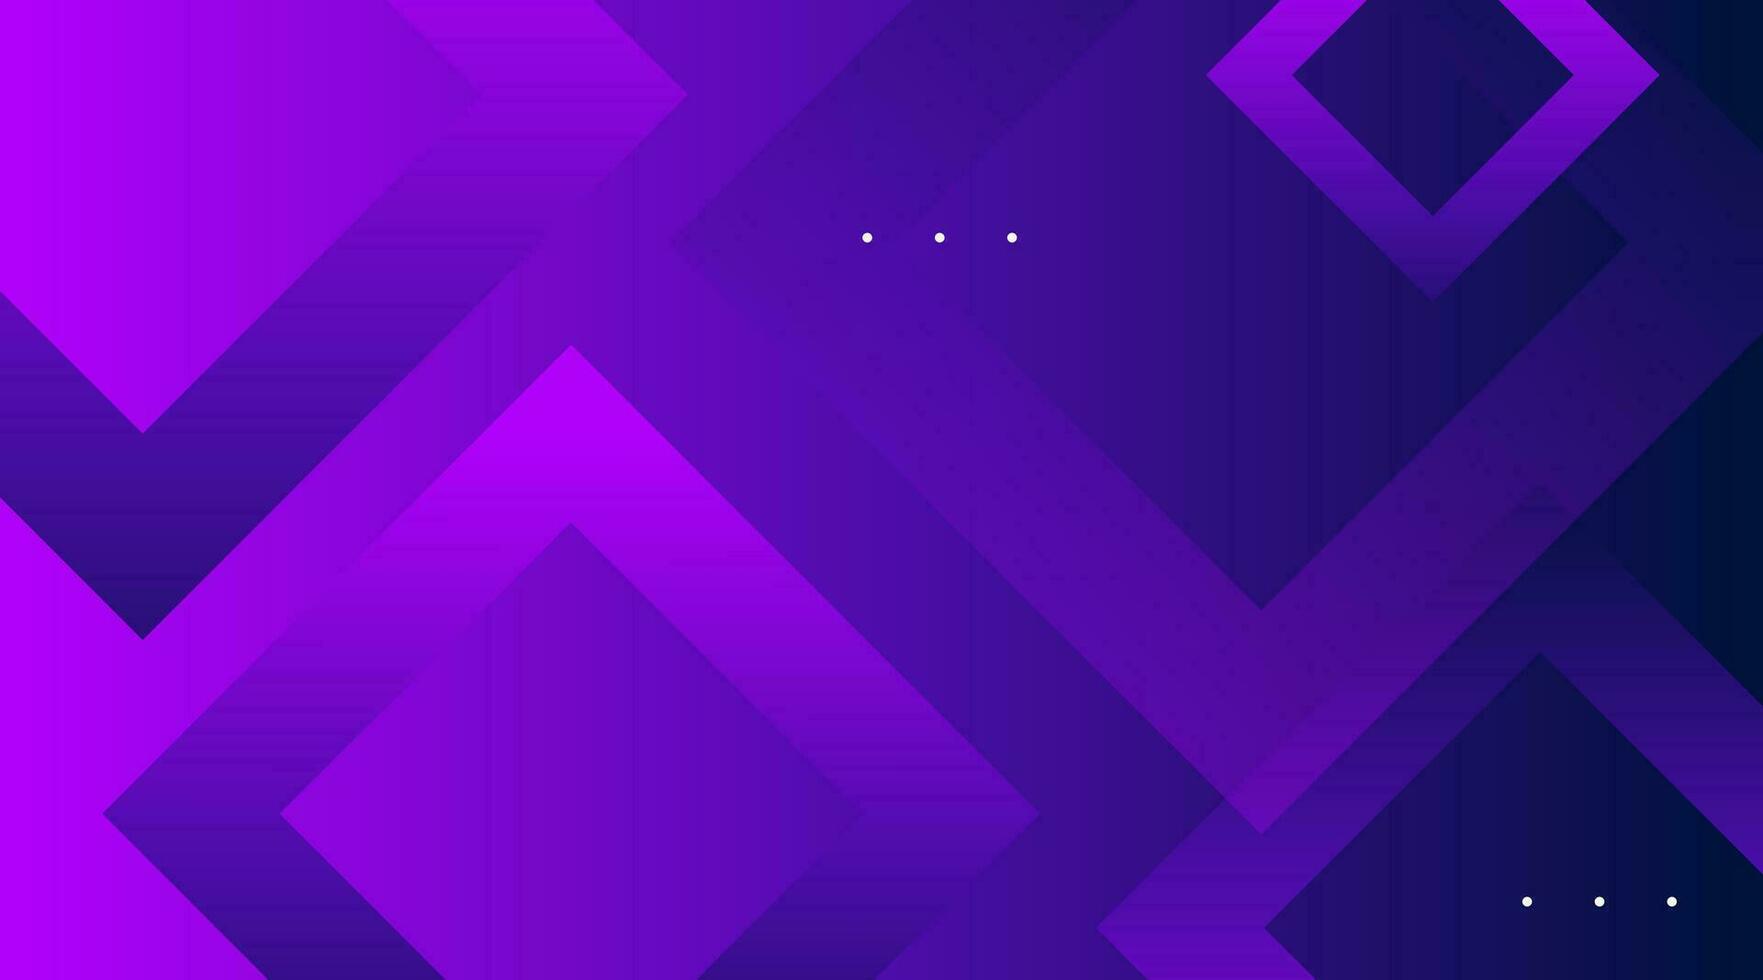 Abstract gradient geometric shapes purple background. Vector illustration